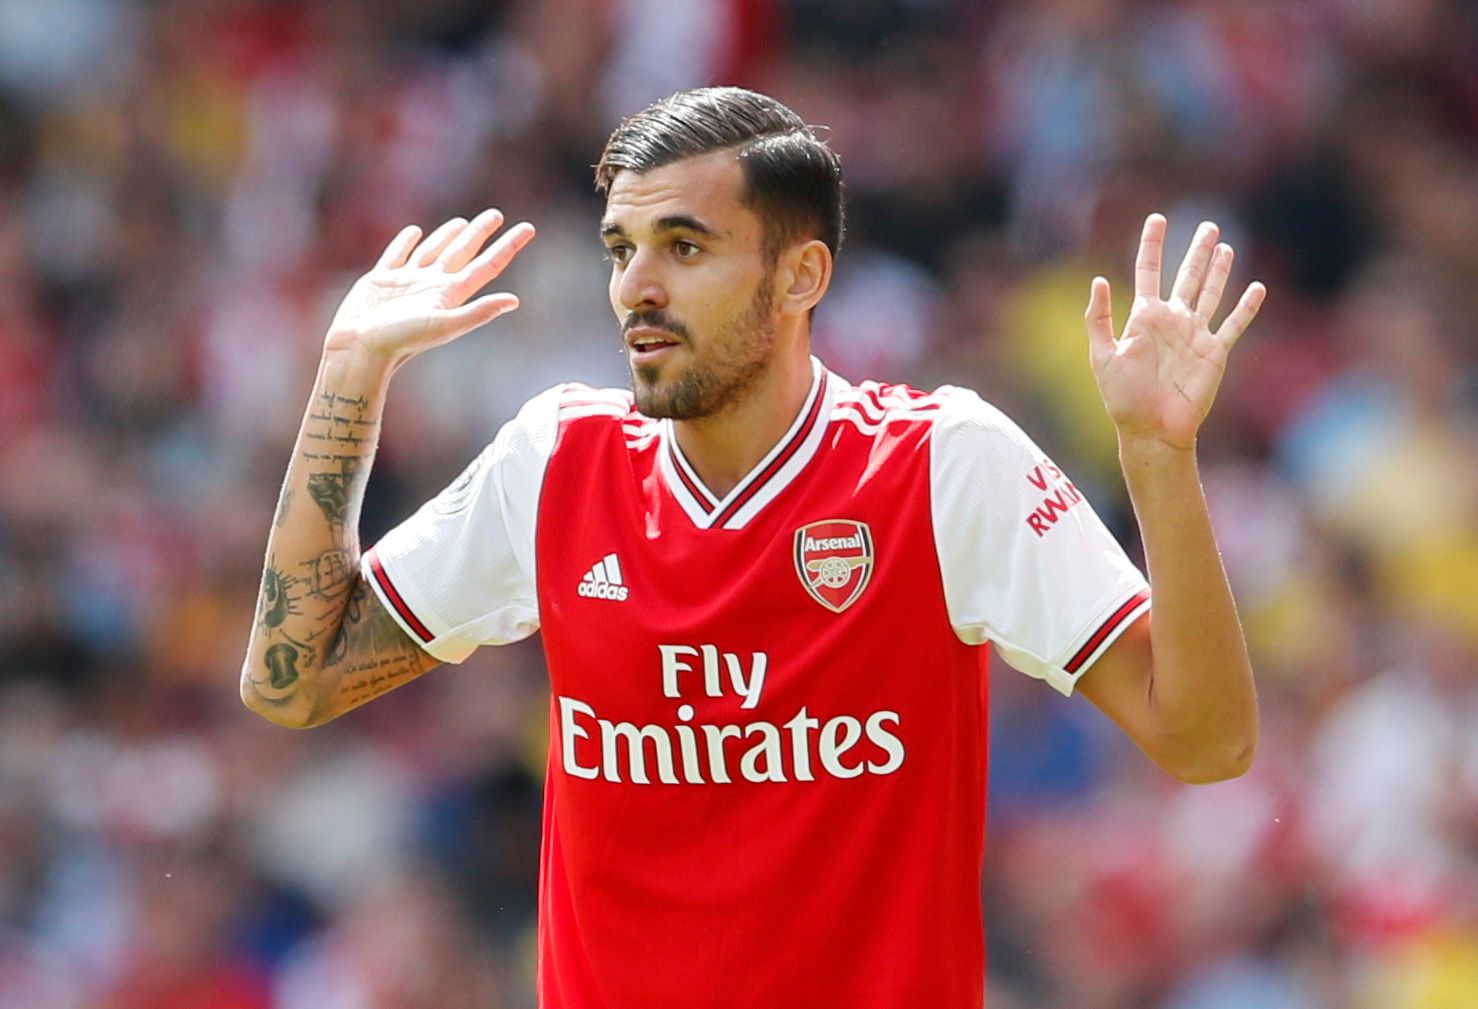 Soccer Football - Premier League - Arsenal v Burnley - Emirates Stadium, London, Britain - August 17, 2019  Arsenal's Dani Ceballos reacts  REUTERS/David Klein  EDITORIAL USE ONLY. No use with unauthorized audio, video, data, fixture lists, club/league logos or 